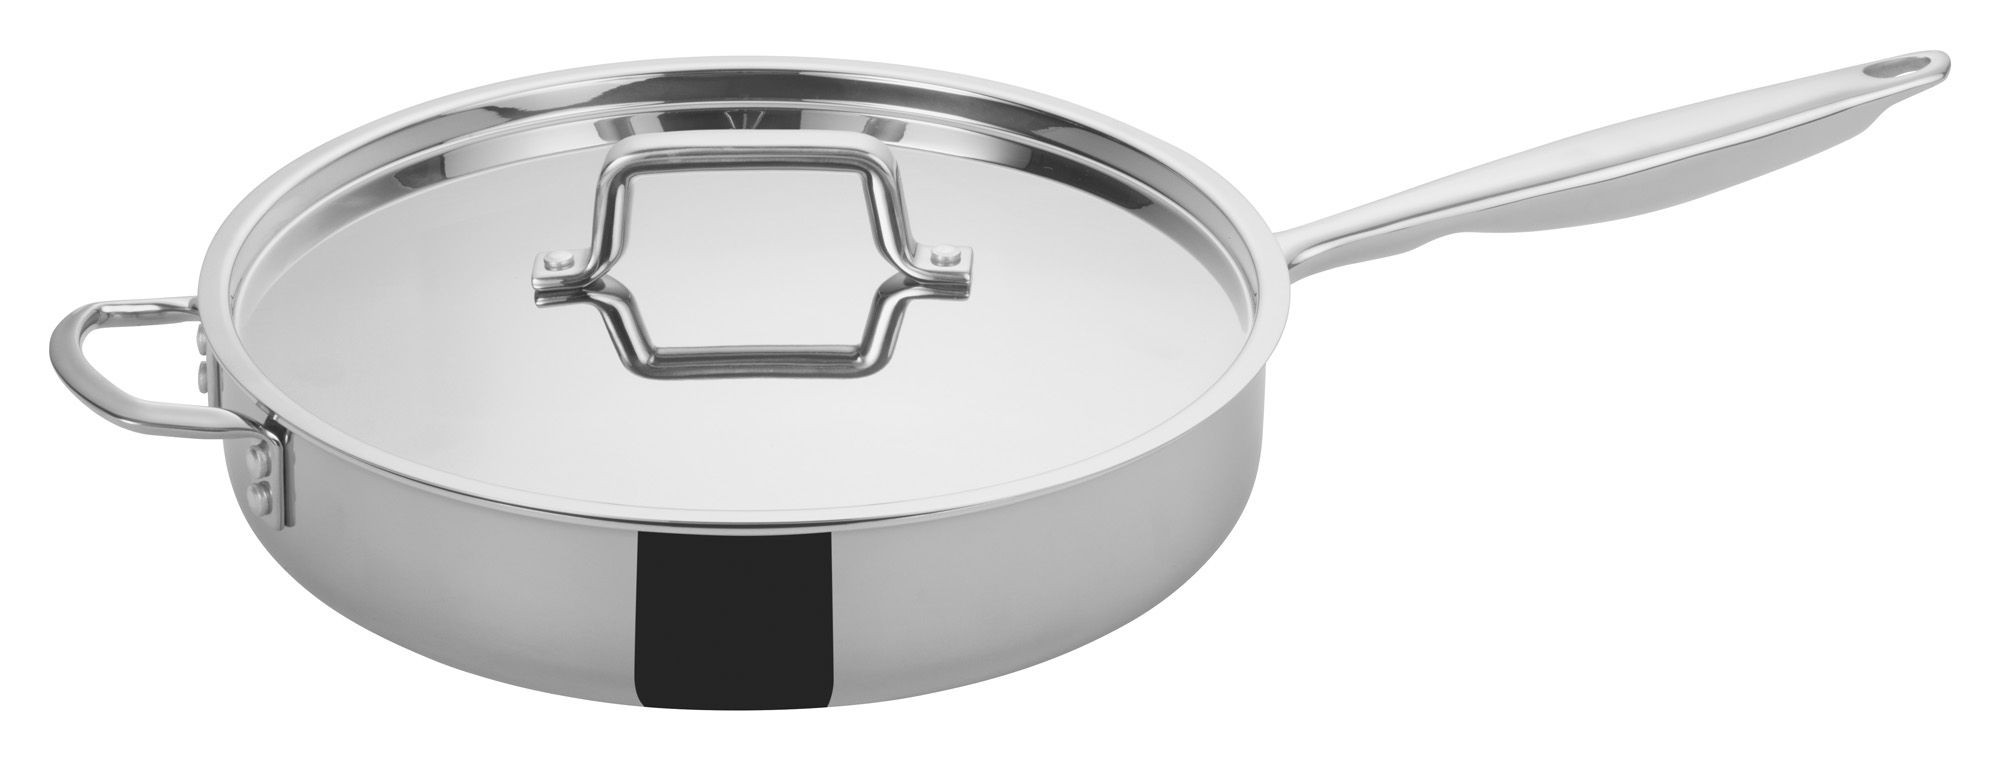 Winco TGET-6 Tri-Ply Stainless Steel 6 Qt. Saute´ Pan with Cover and Helper Handle